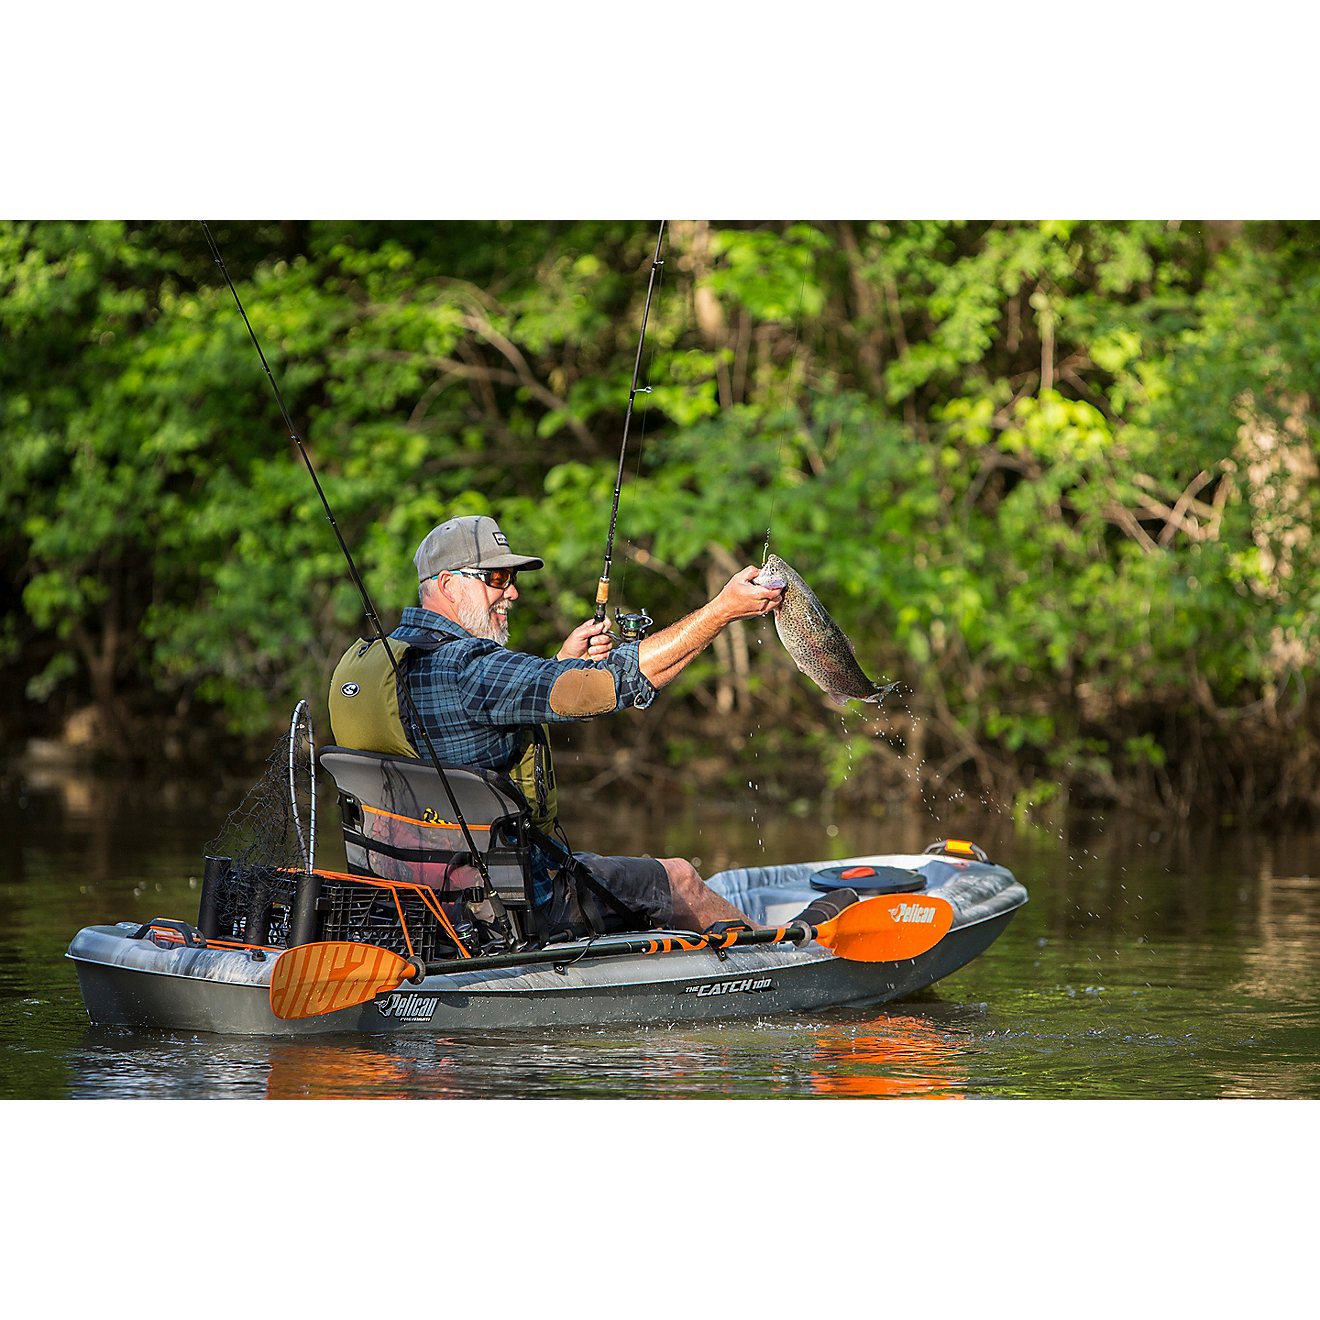 Pelican Premium The Catch 100 10 ft Sit-On-Top Fishing Kayak                                                                     - view number 8